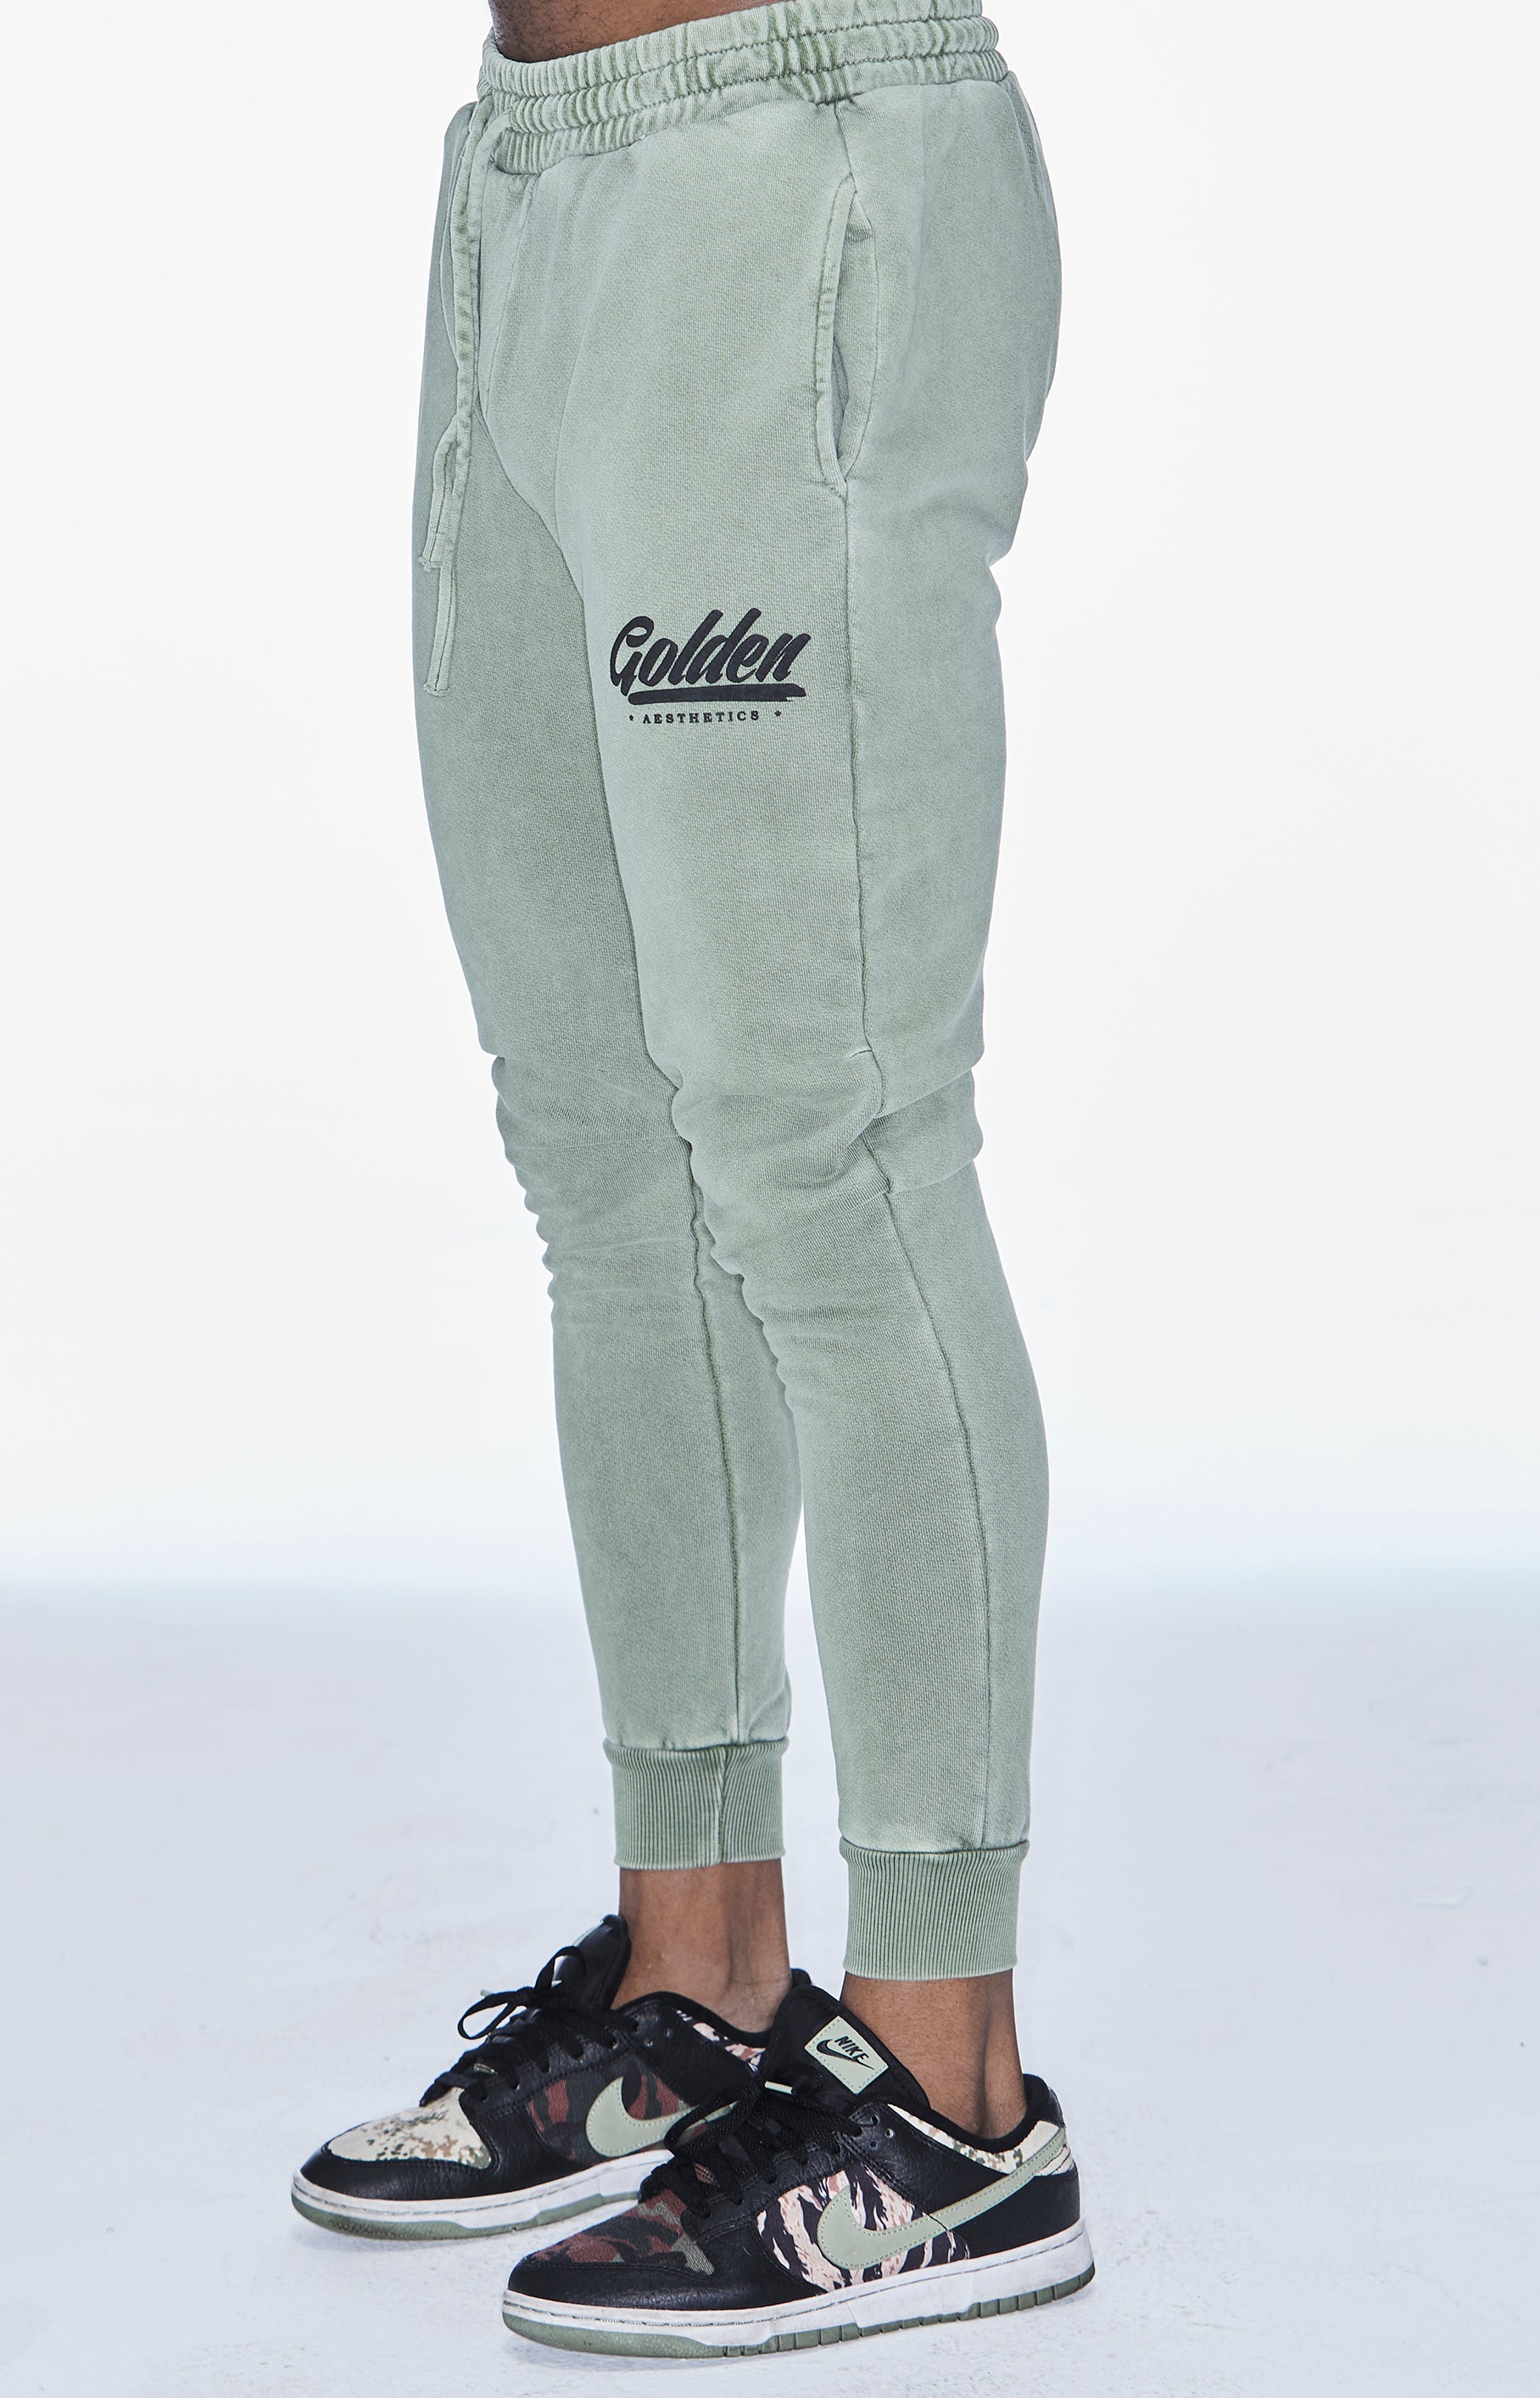 Faded Army Joggers